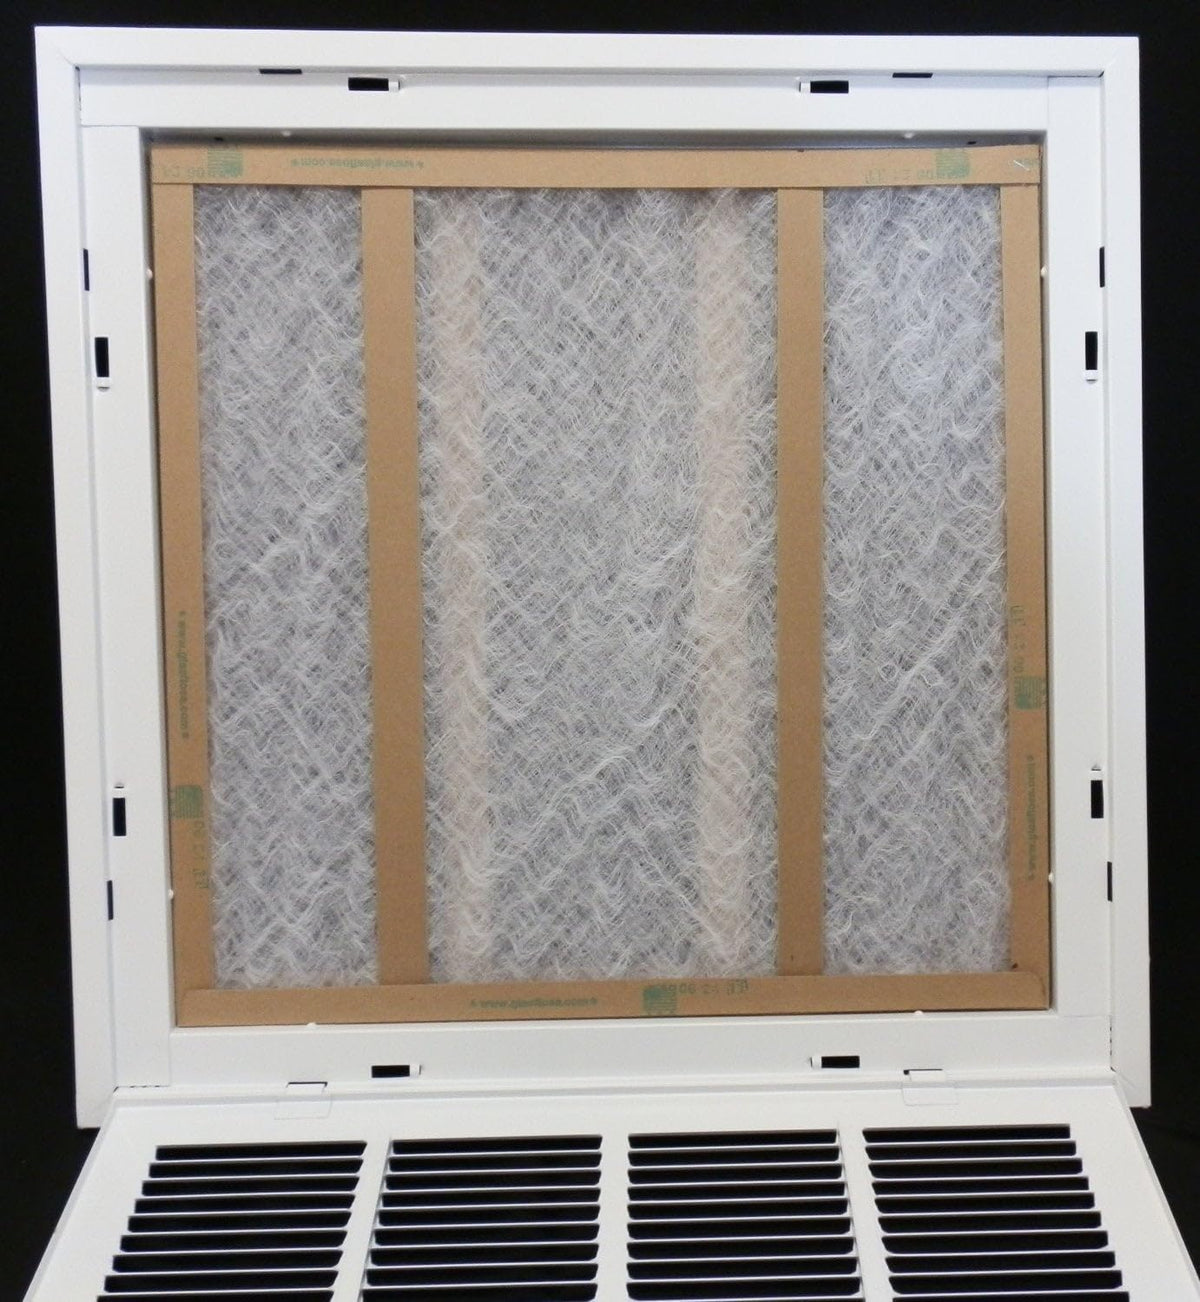 16&quot; X 14&quot; Steel Return Air Filter Grille for 1&quot; Filter - Fixed Hinged - [Outer Dimensions: 18 5/8&quot; X 16 5/8&quot;]